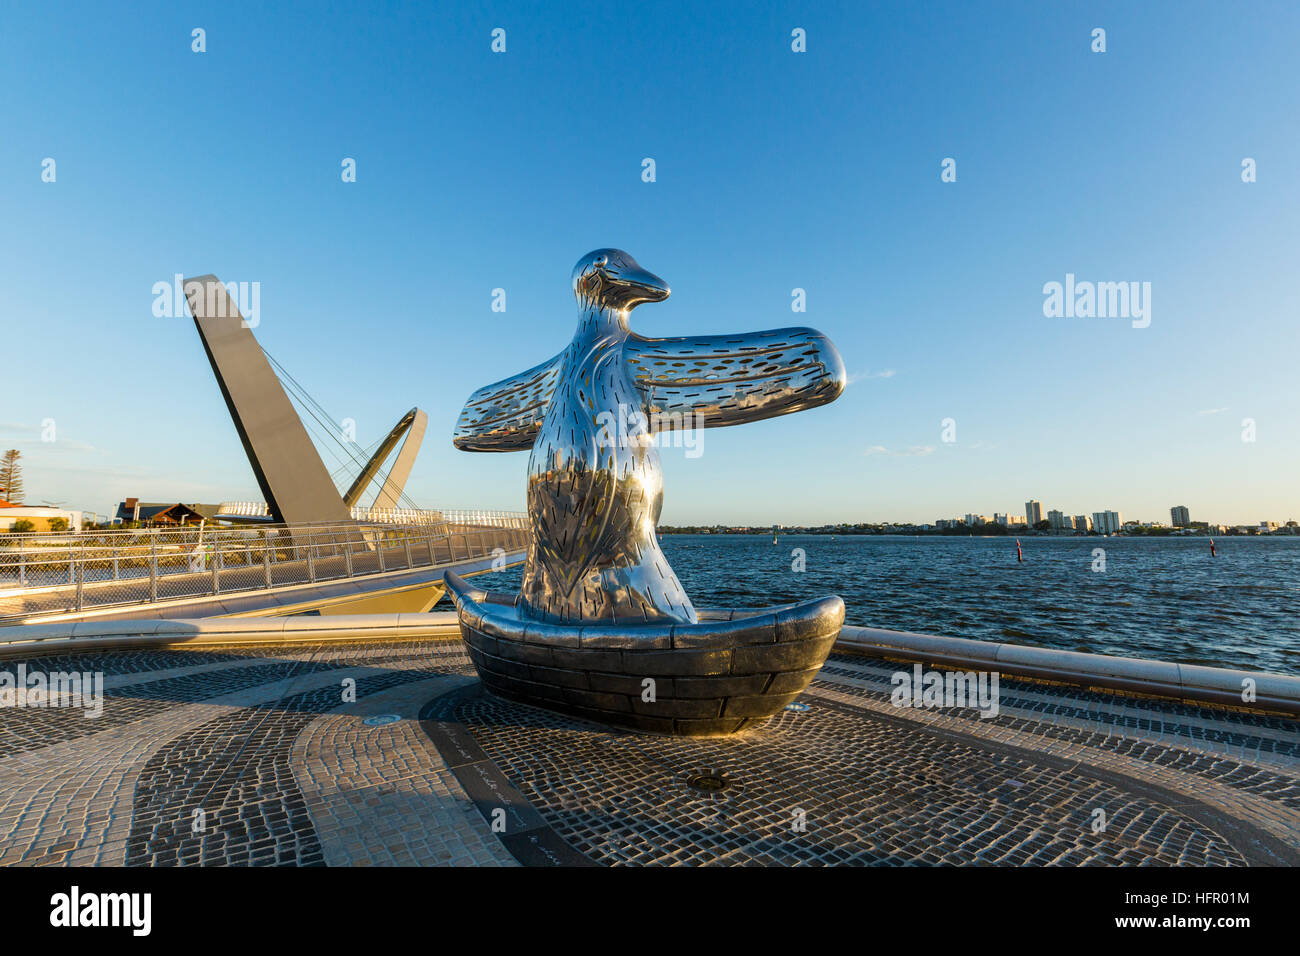 The First Contact sculpture on the Swan River with the Elizabeth Quay bridge beyond.  Perth, Western Australia, Australia Stock Photo